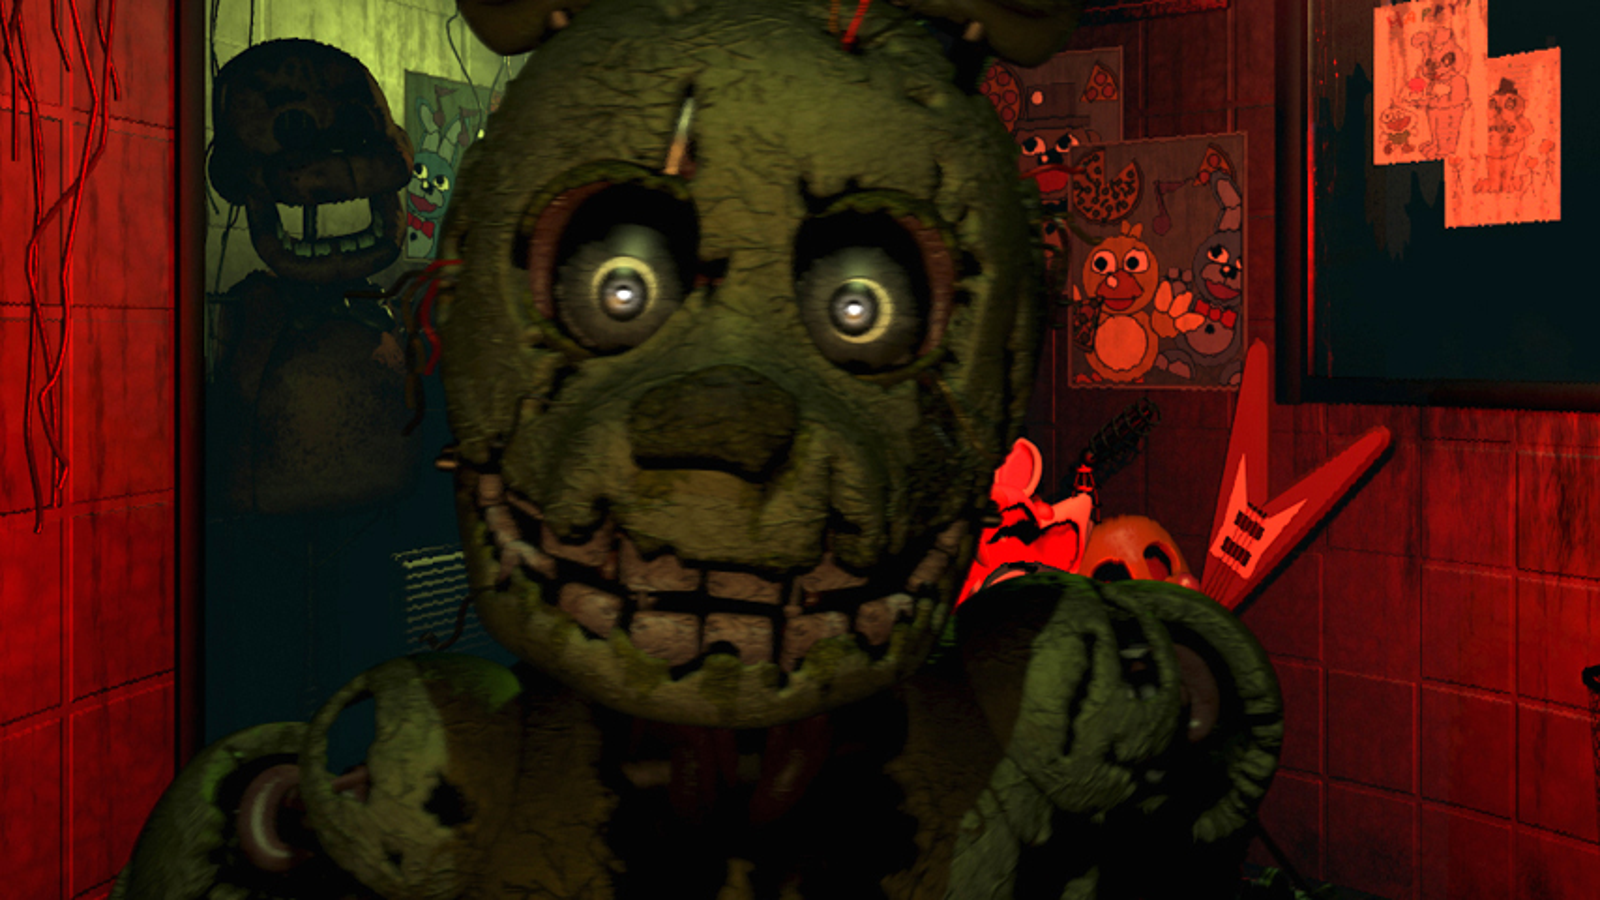 Five Nights At Freddy's 4: Halloween Edition PC Game - Free